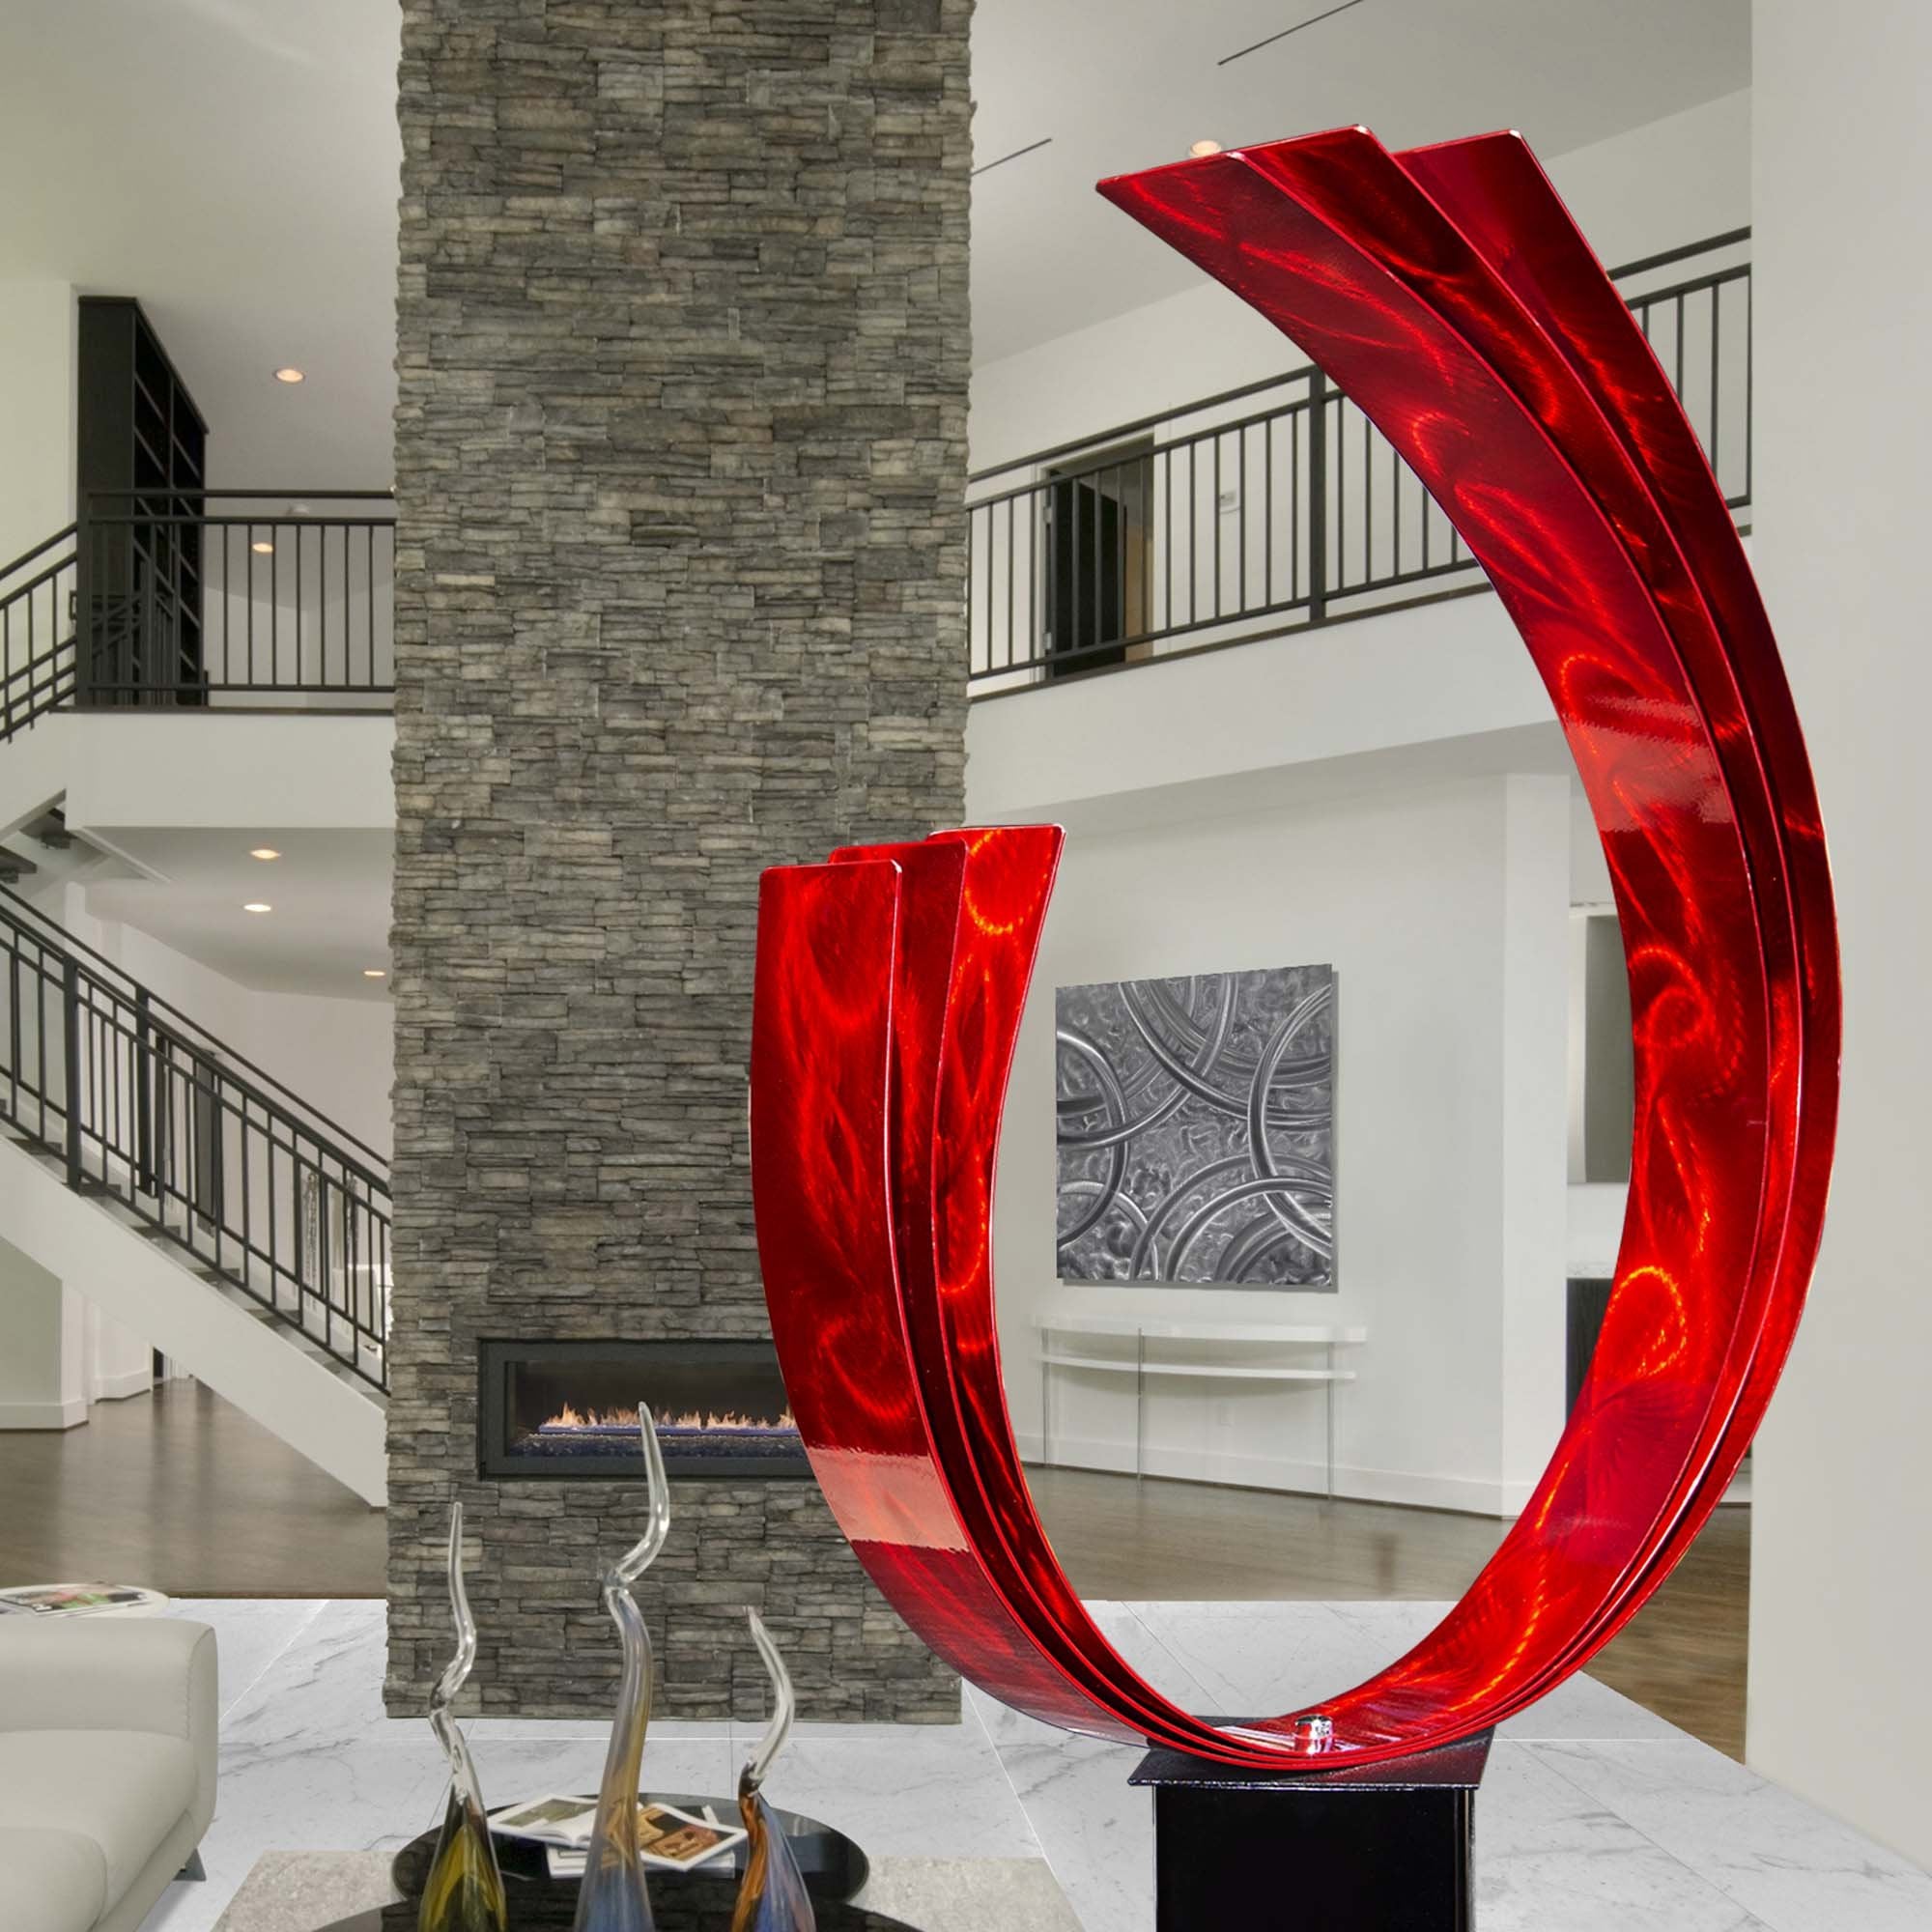 Giant Red Hand Chair Life Modern Art Size Statue